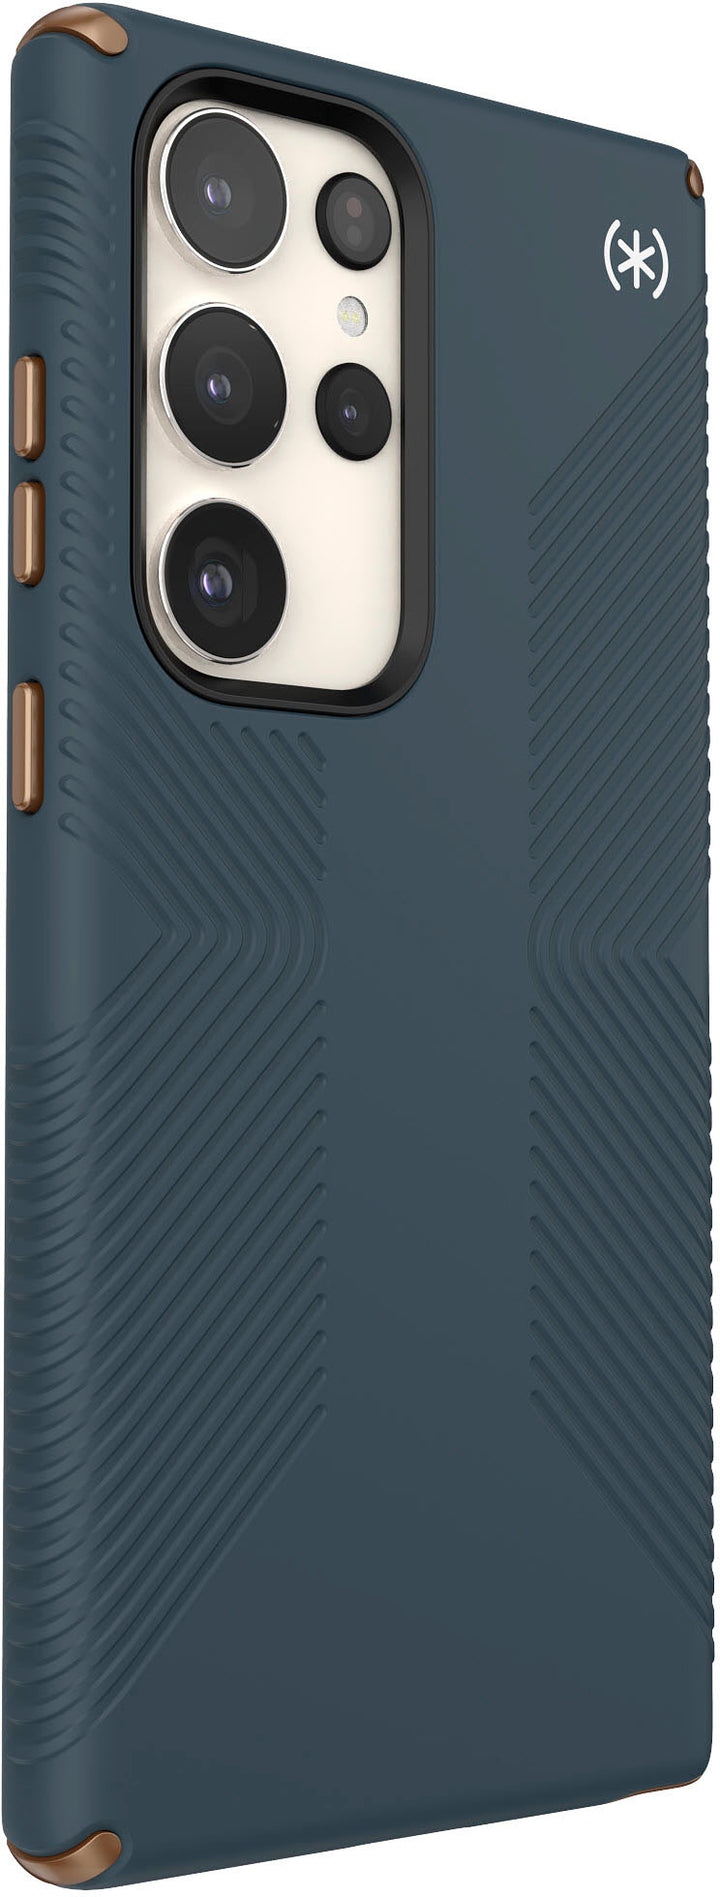 Speck - Presidio2 Grip Case for Samsung Galaxy S23 Ultra - Charcoal Grey/Cool Bronze/White_1